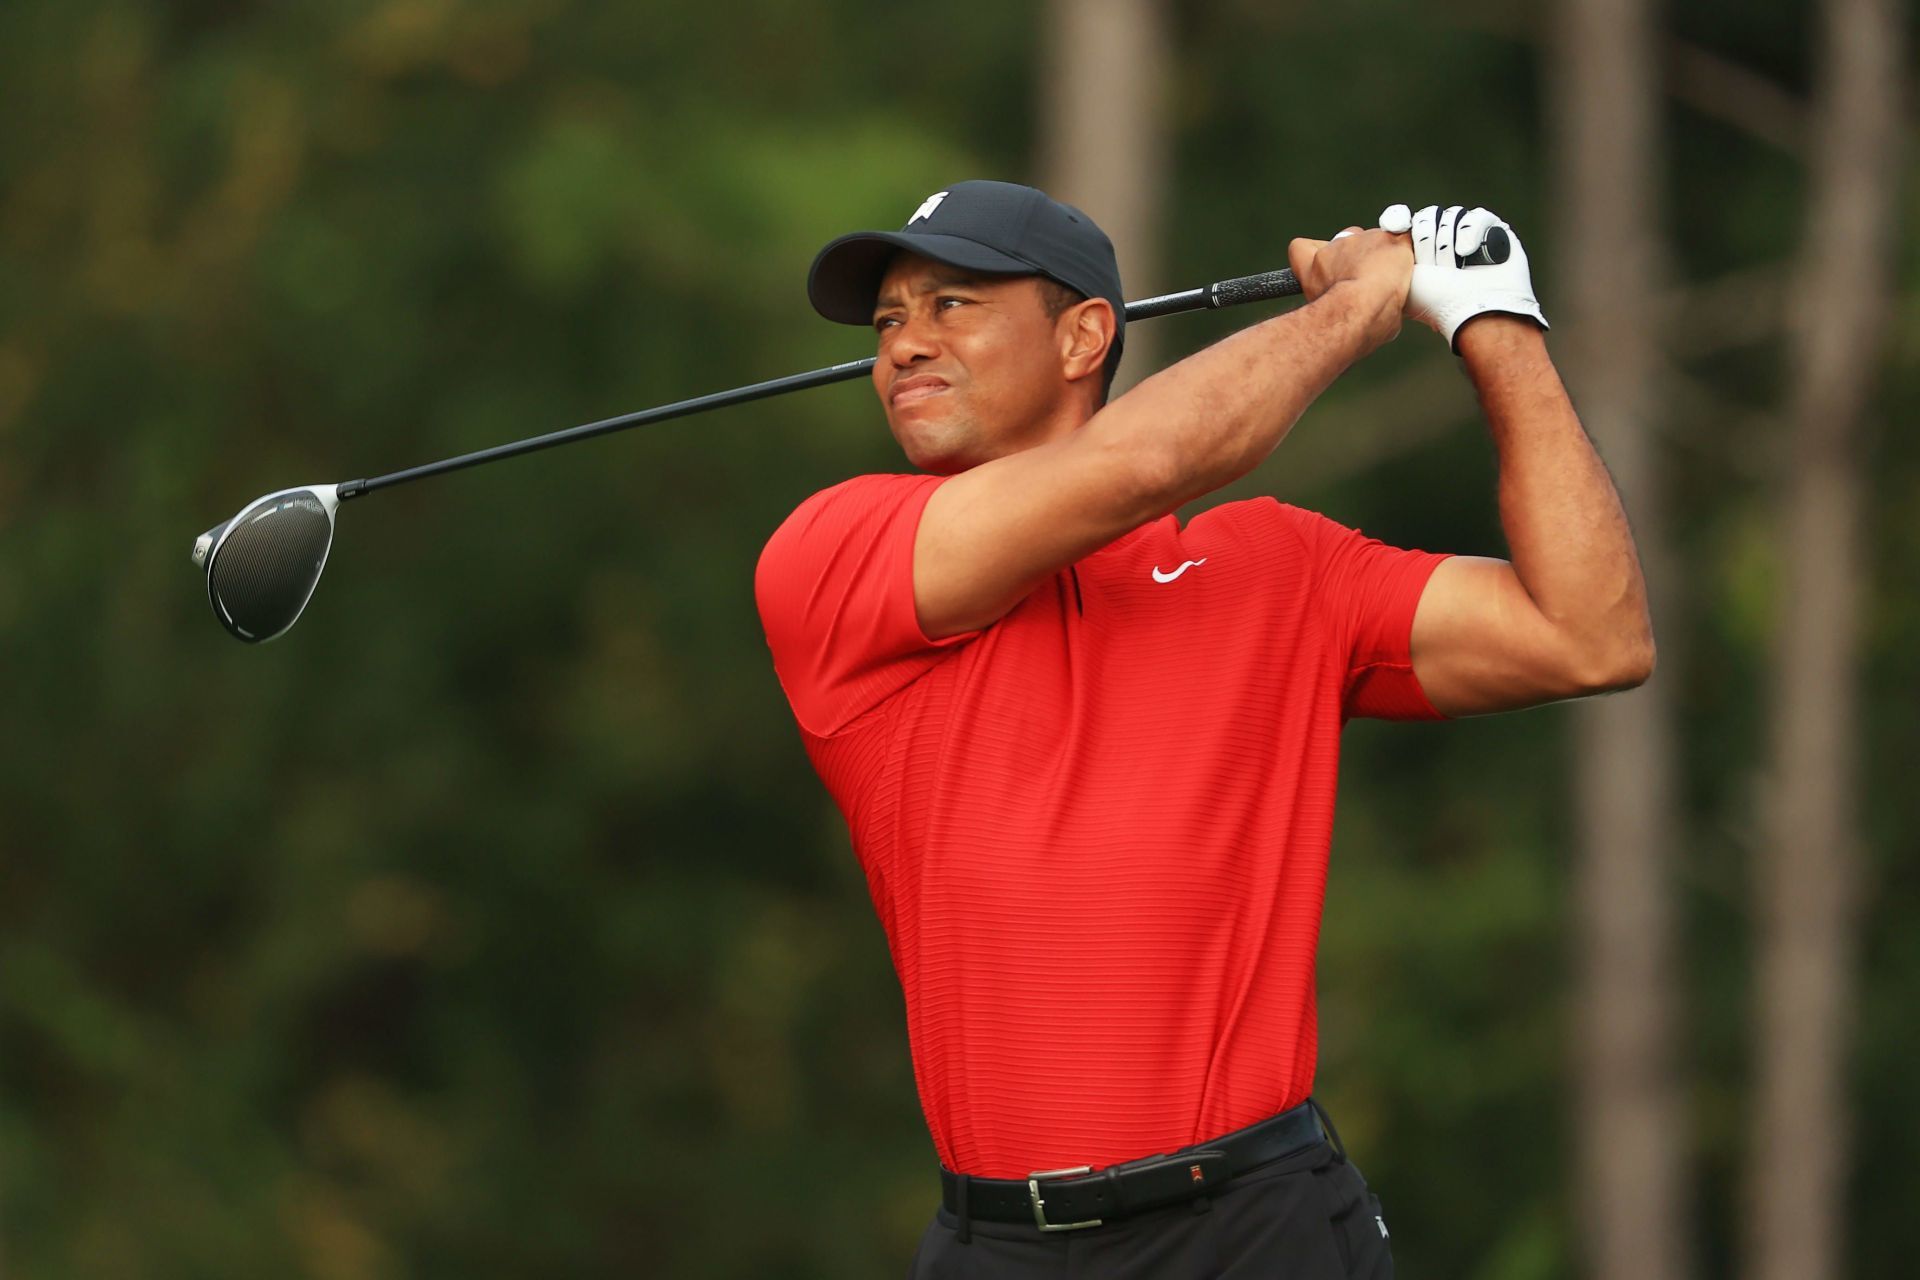 Tiger Woods, the highest paid golfer